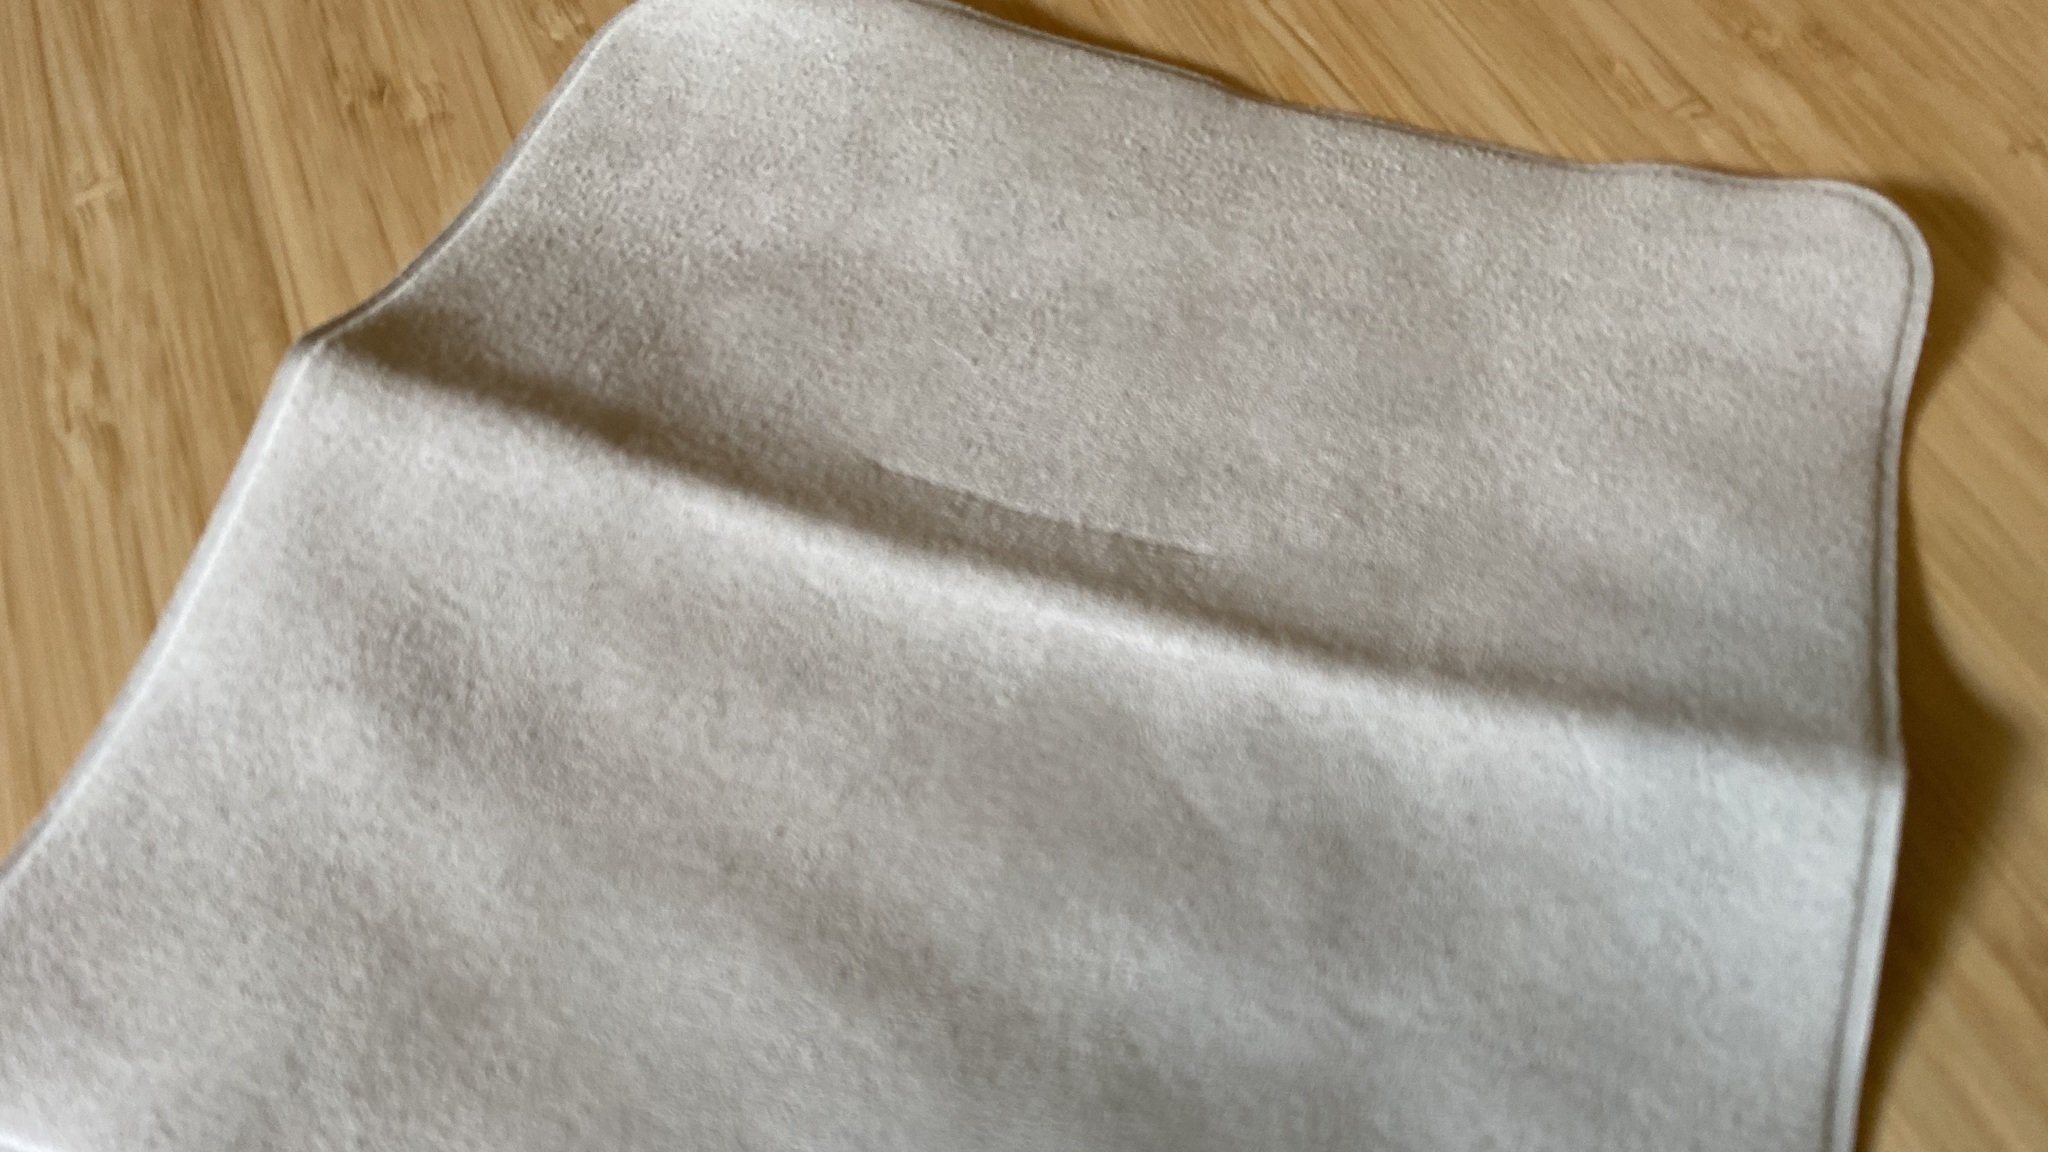 Special cleaning cloth for the nano-texture iMac screen